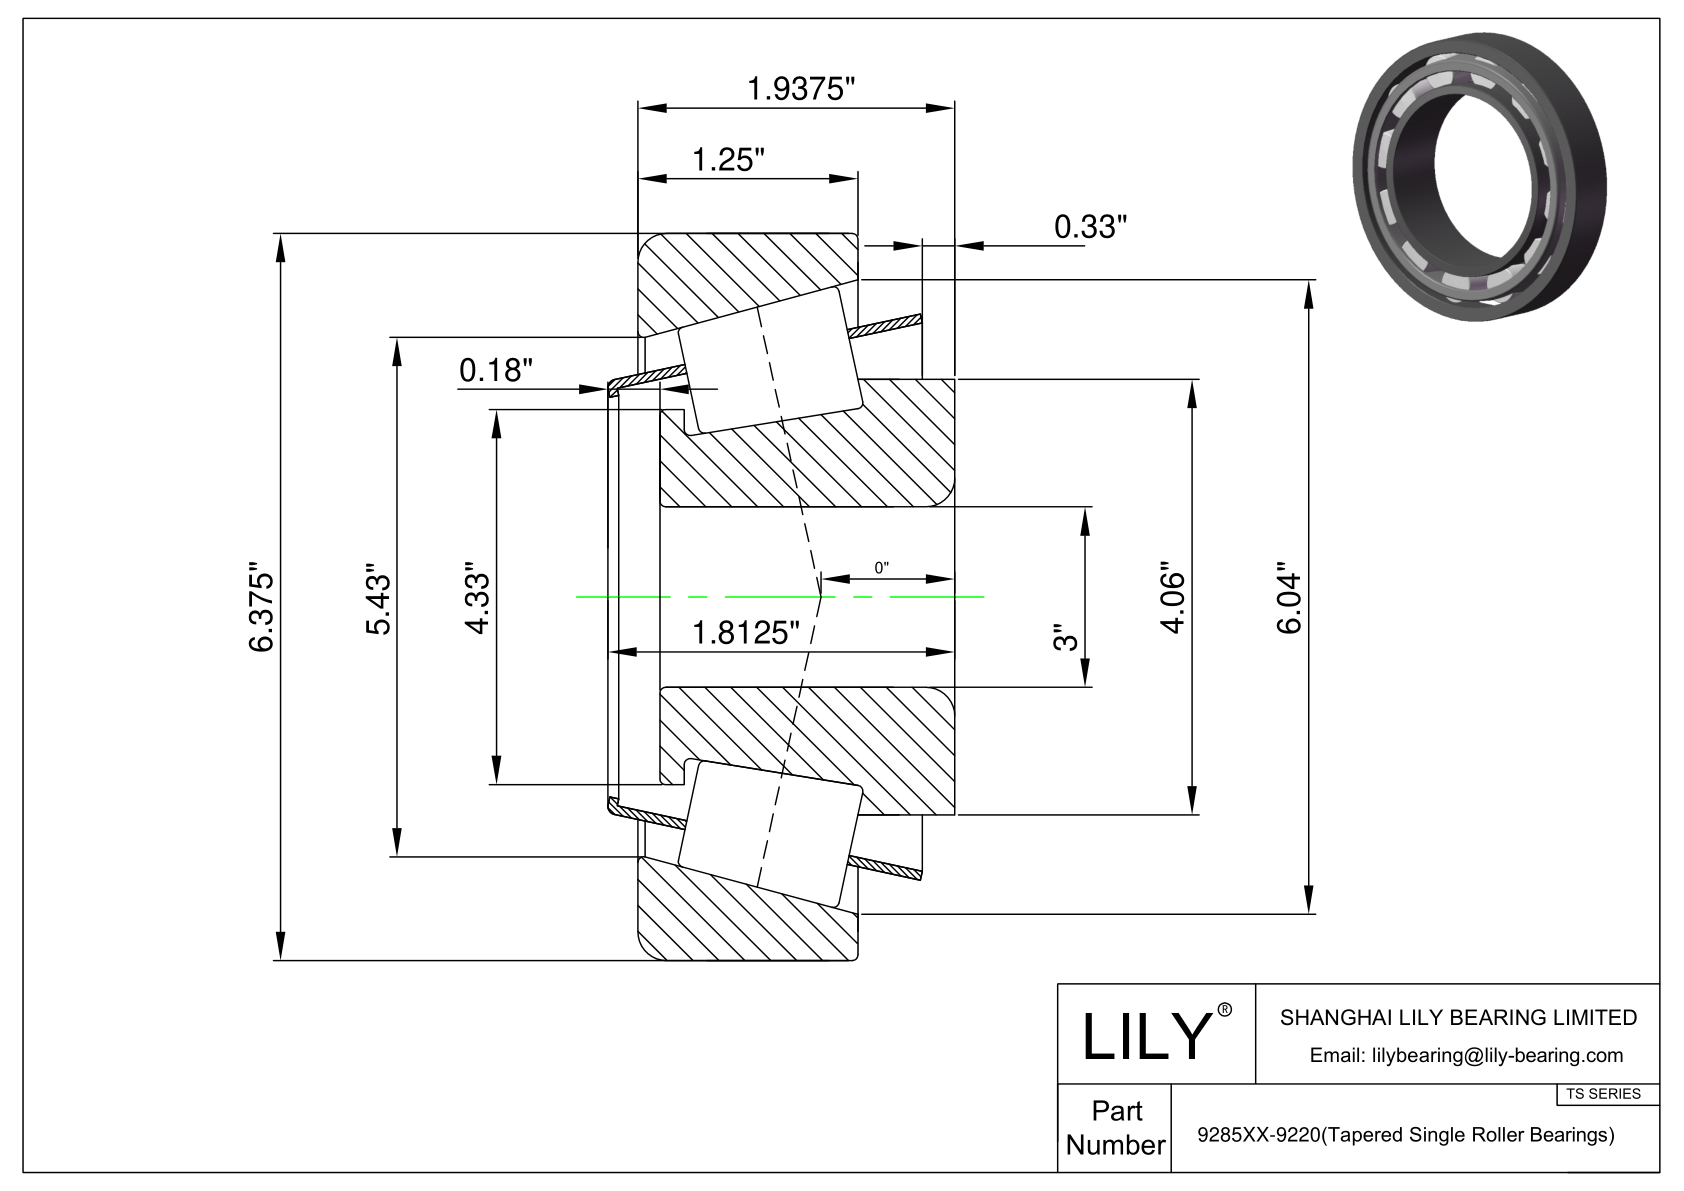 9285XX-9220 TS (Tapered Single Roller Bearings) (Imperial) cad drawing